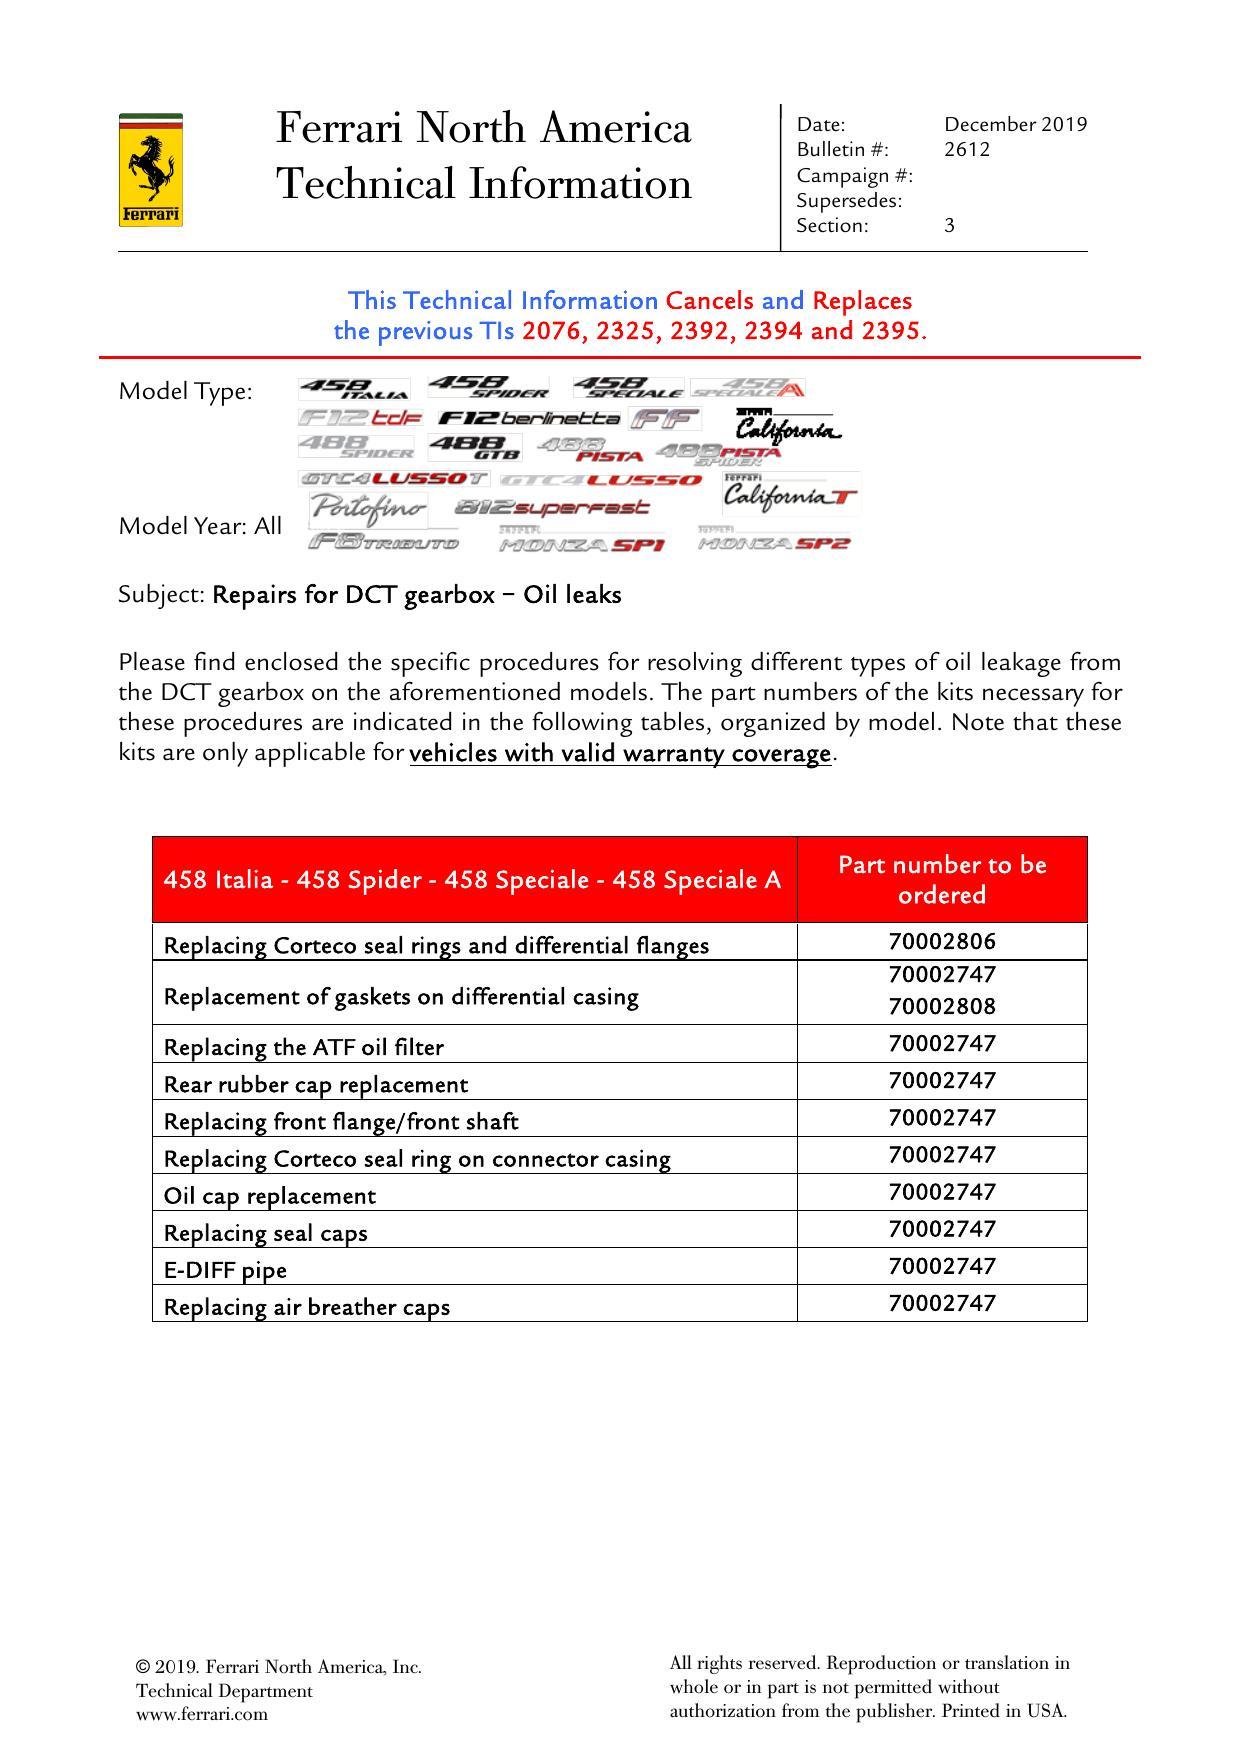 ferrari-technical-information-ti-2612---repairs-for-dct-gearbox-oil-leaks-2019.pdf